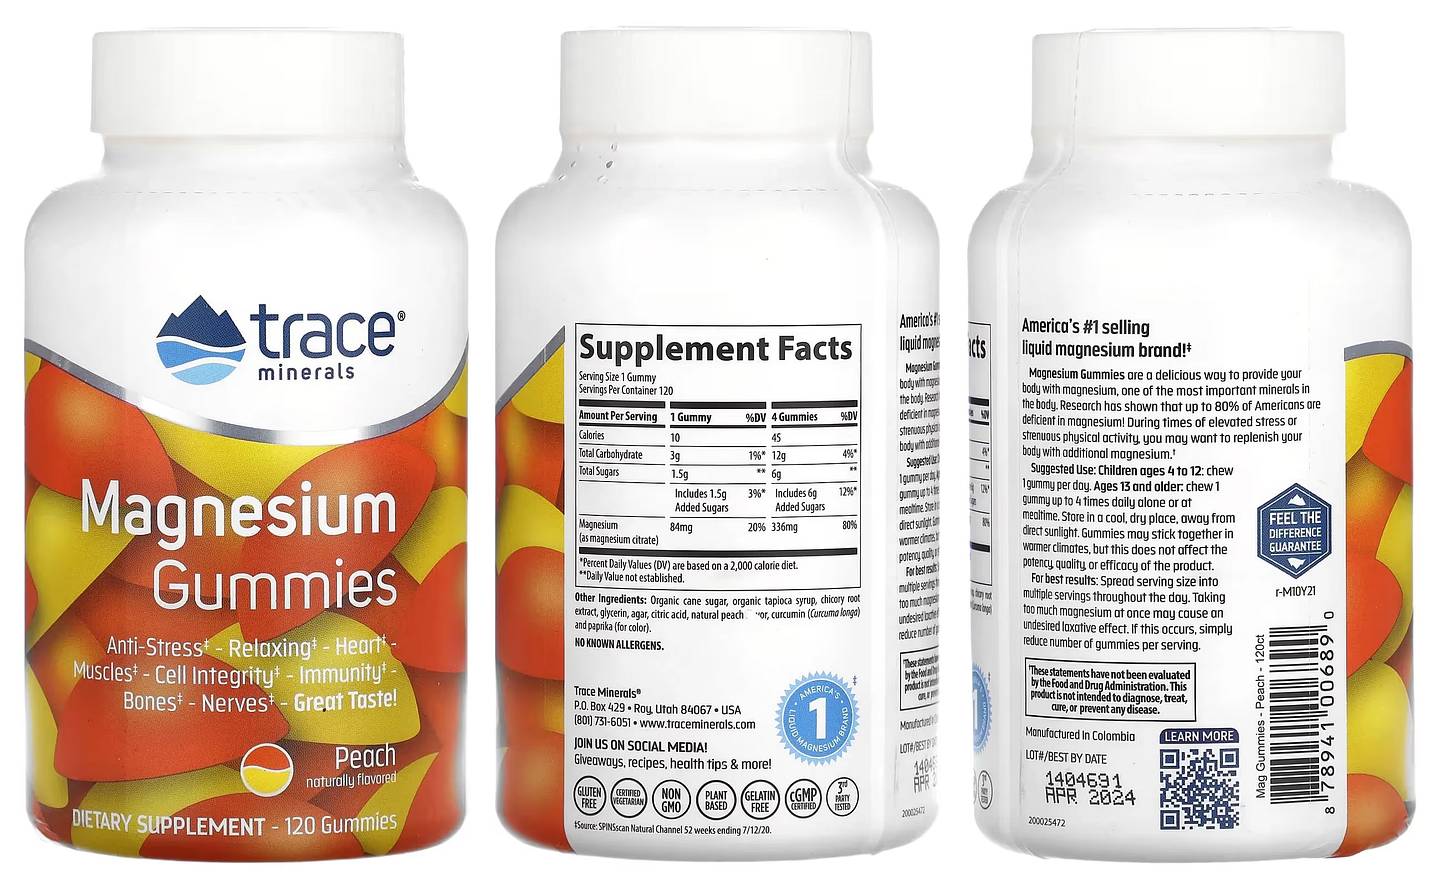 Trace Minerals, Magnesium Gummies packaging